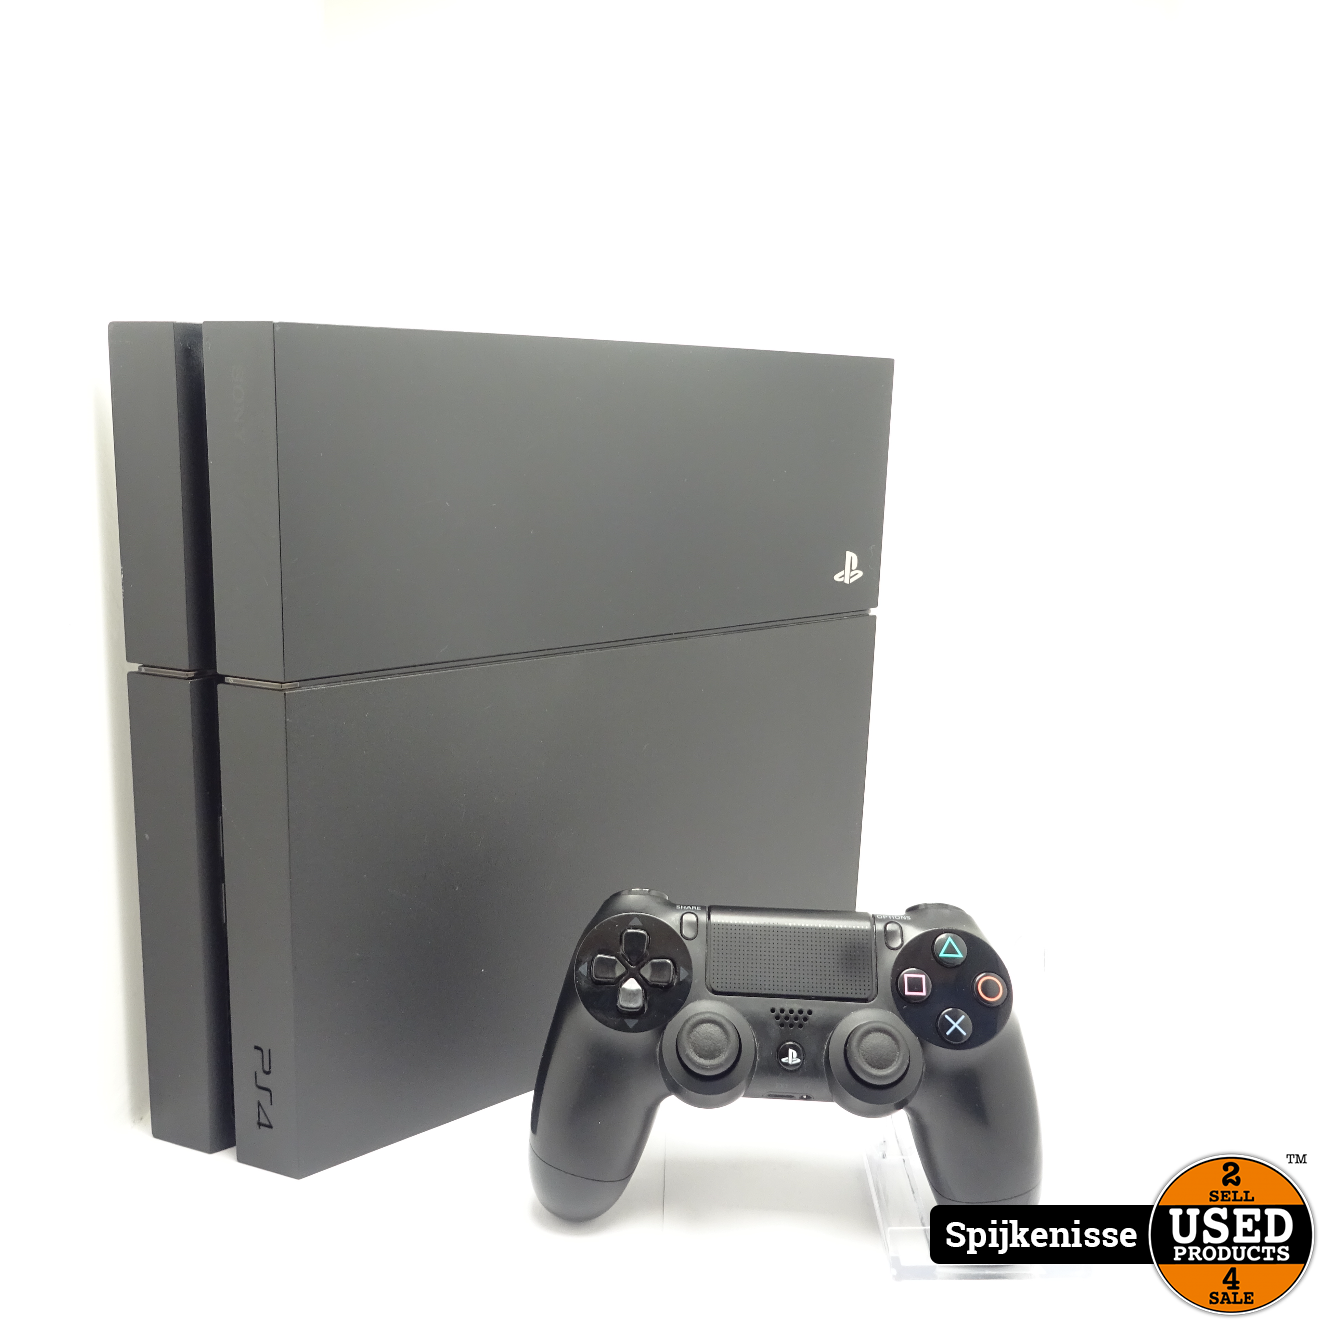 chaos boeren Voetganger Sony Playstation 4 500GB + 1 Controller *806359* - Used Products Spijkenisse